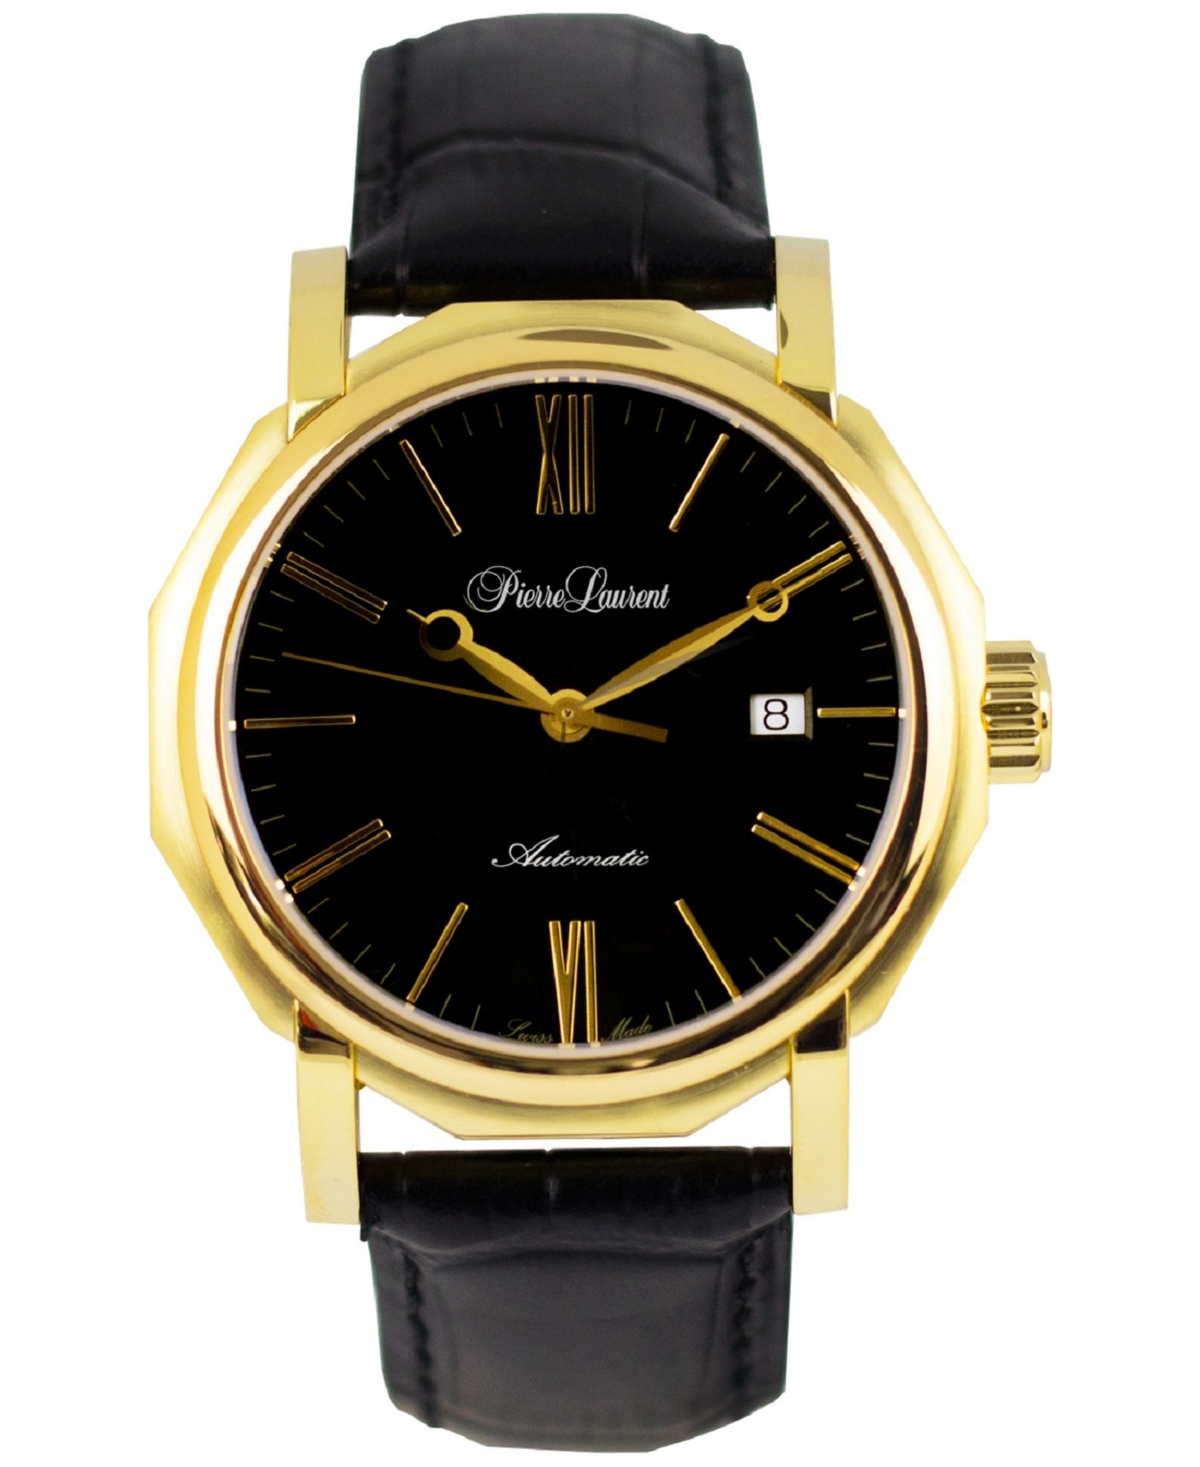 Pierre Laurent Men's Swiss Automatic Heirloom Black Leather Strap Watch 46mm In Kt Gold Plated With Black Dial